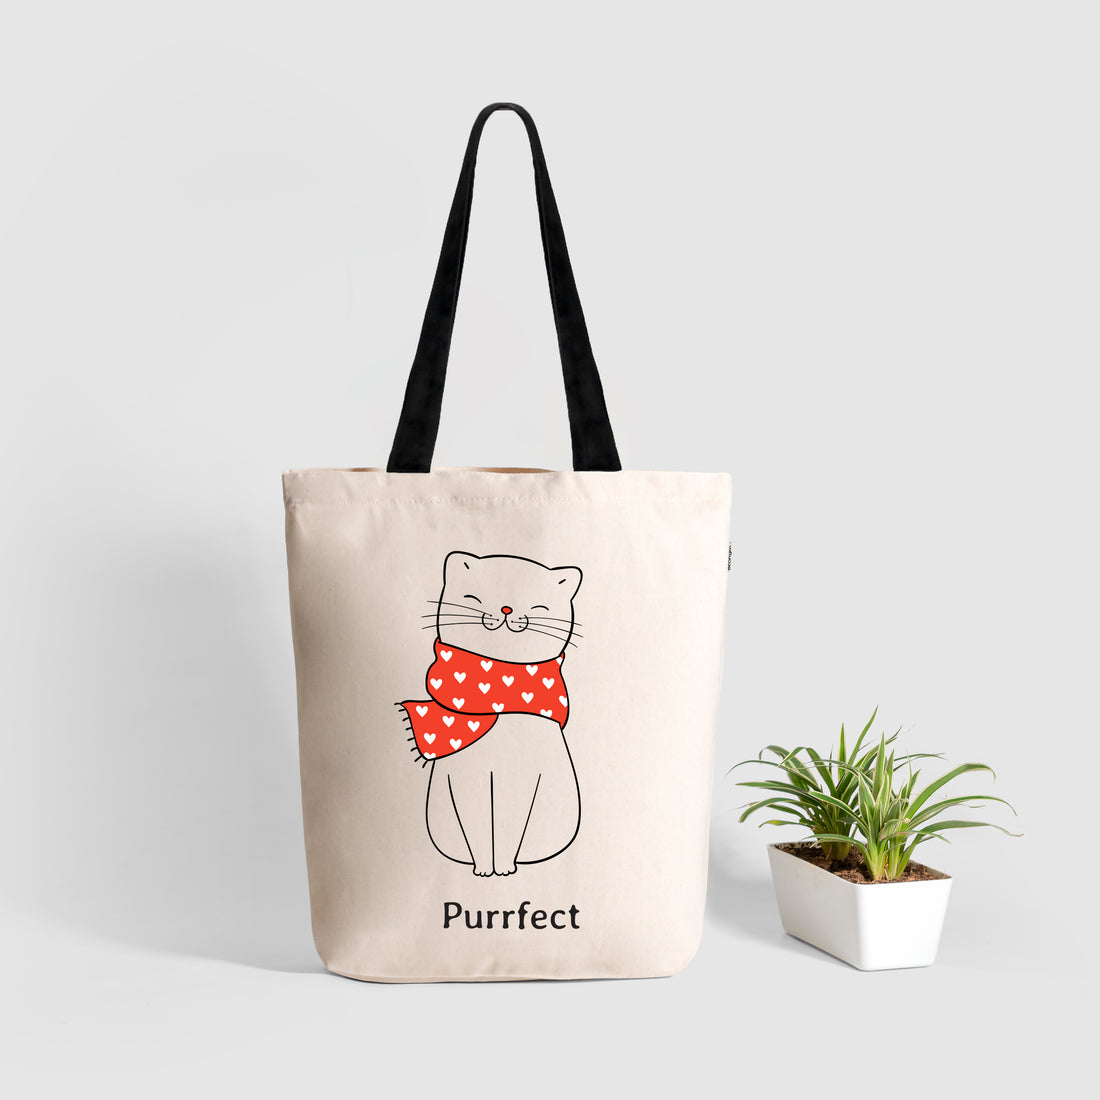 Tote bag tote bag, Tote bag for woman, Tote bags office, Tote bags, Side bags, Corporate giftings, Ecoright tote bags